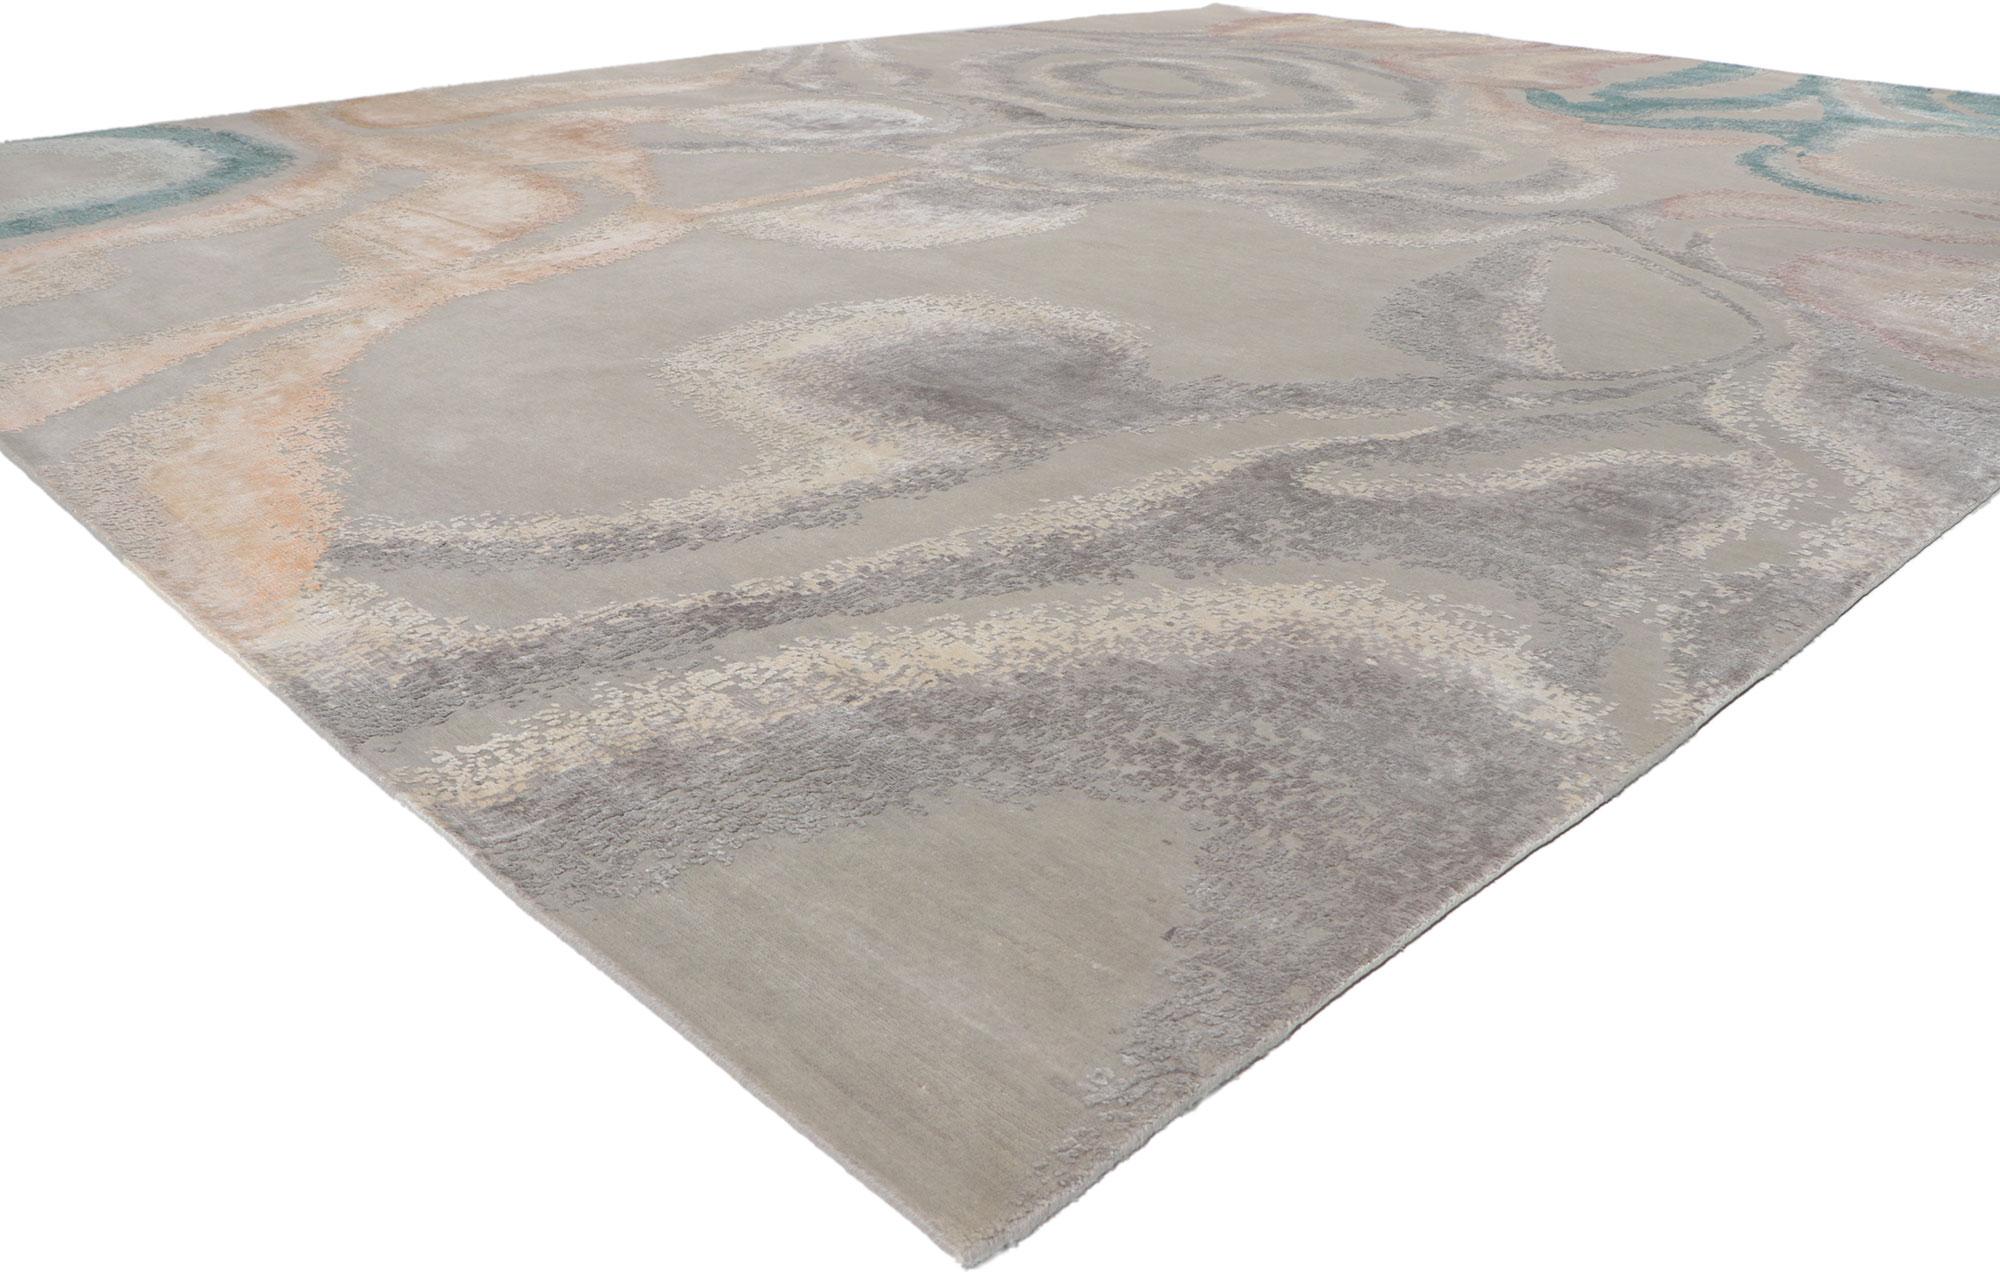 30789 New Contemporary Area Rug Inspired by Georgia O'Keeffe 11'11 x 15'01.
Showcasing a modern style and raised silk design with incredible detail and texture, this hand knotted contemporary textured rug is a captivating vision of woven beauty. The